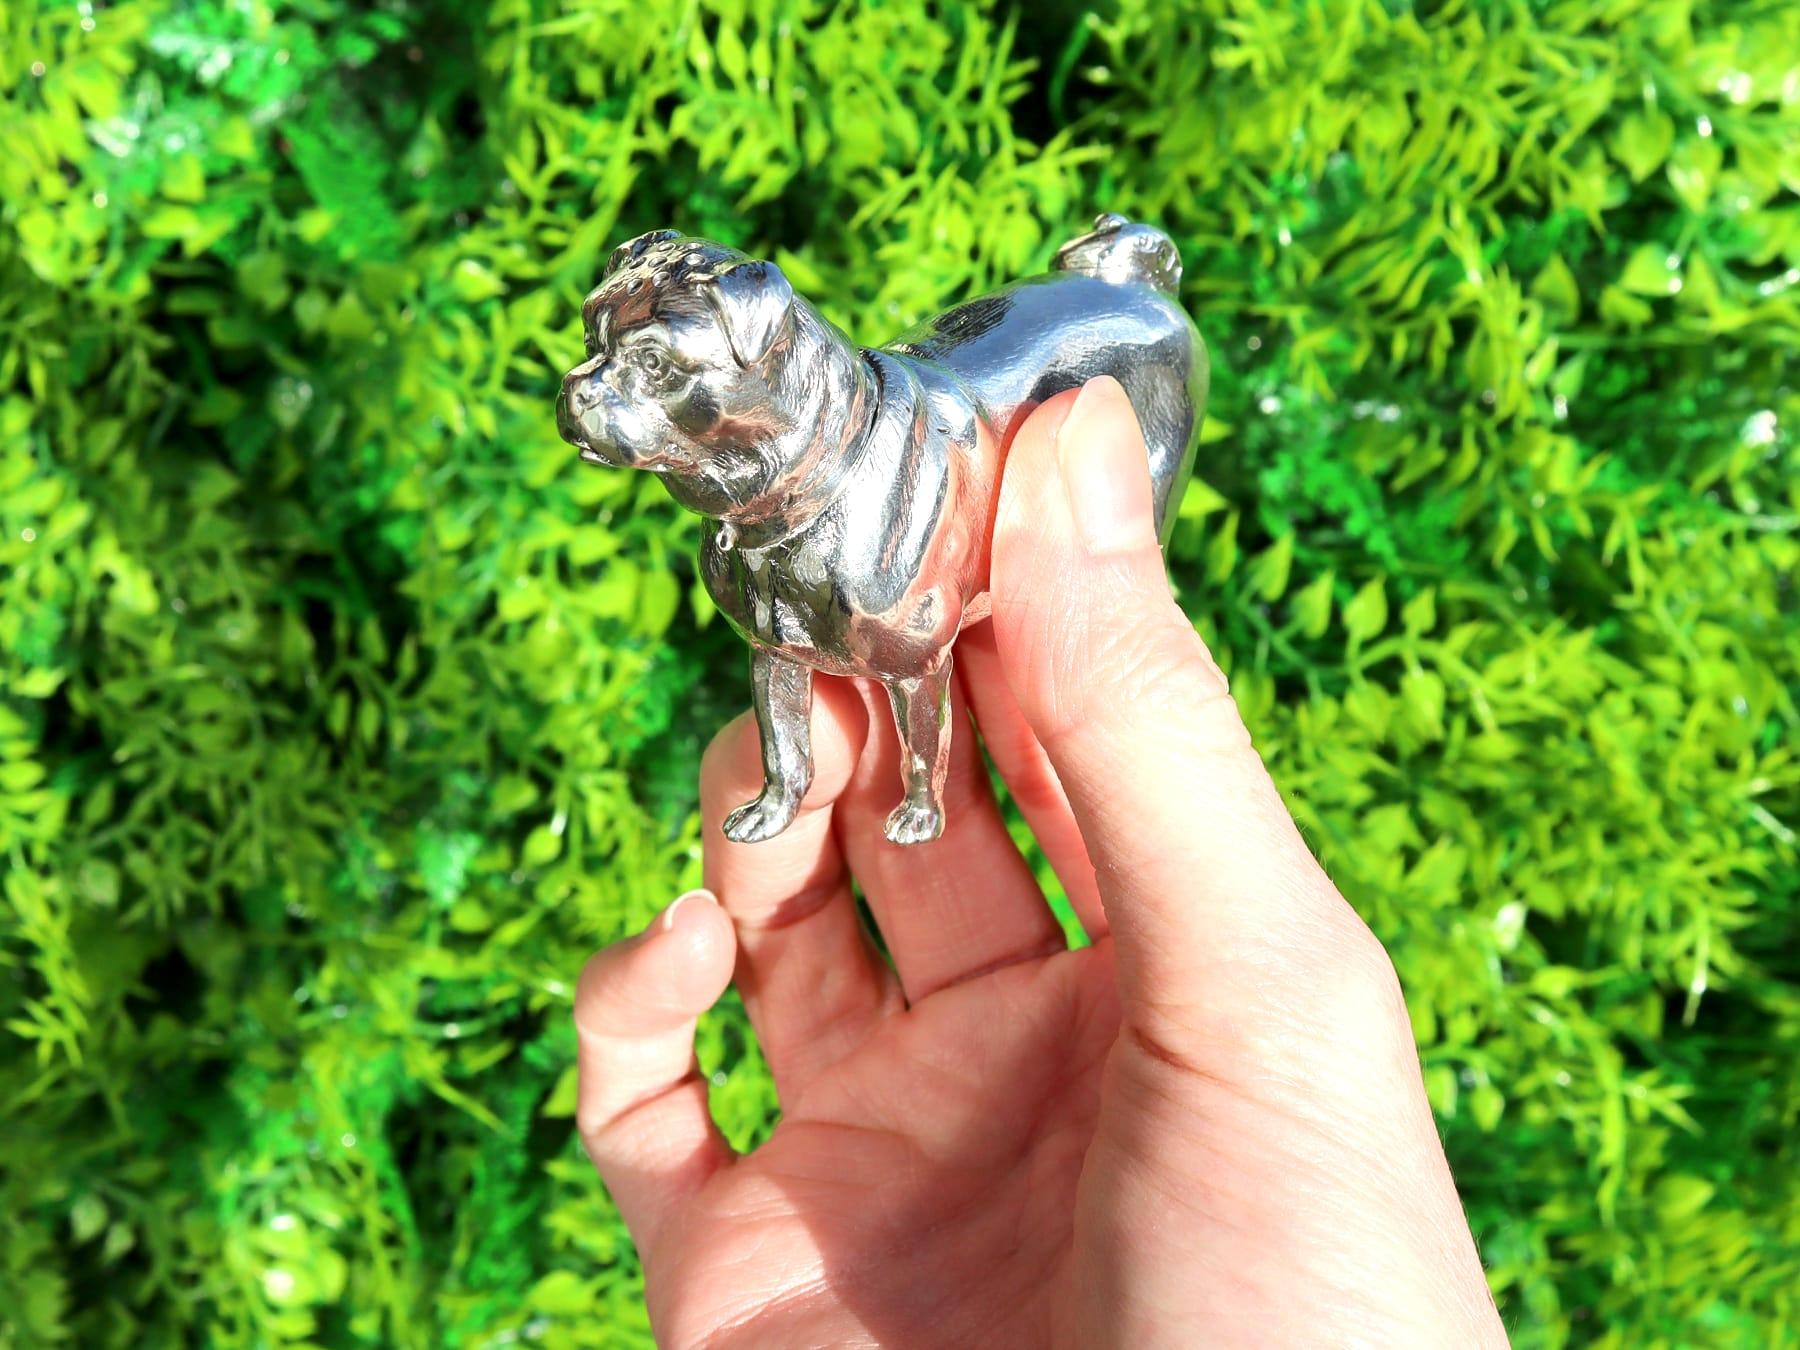 An exceptional, fine and impressive antique Victorian English cast sterling silver pepperette modelled in the form of a pug; an addition to our animal related silverware collection.

This exceptional and rare antique Victorian cast sterling silver